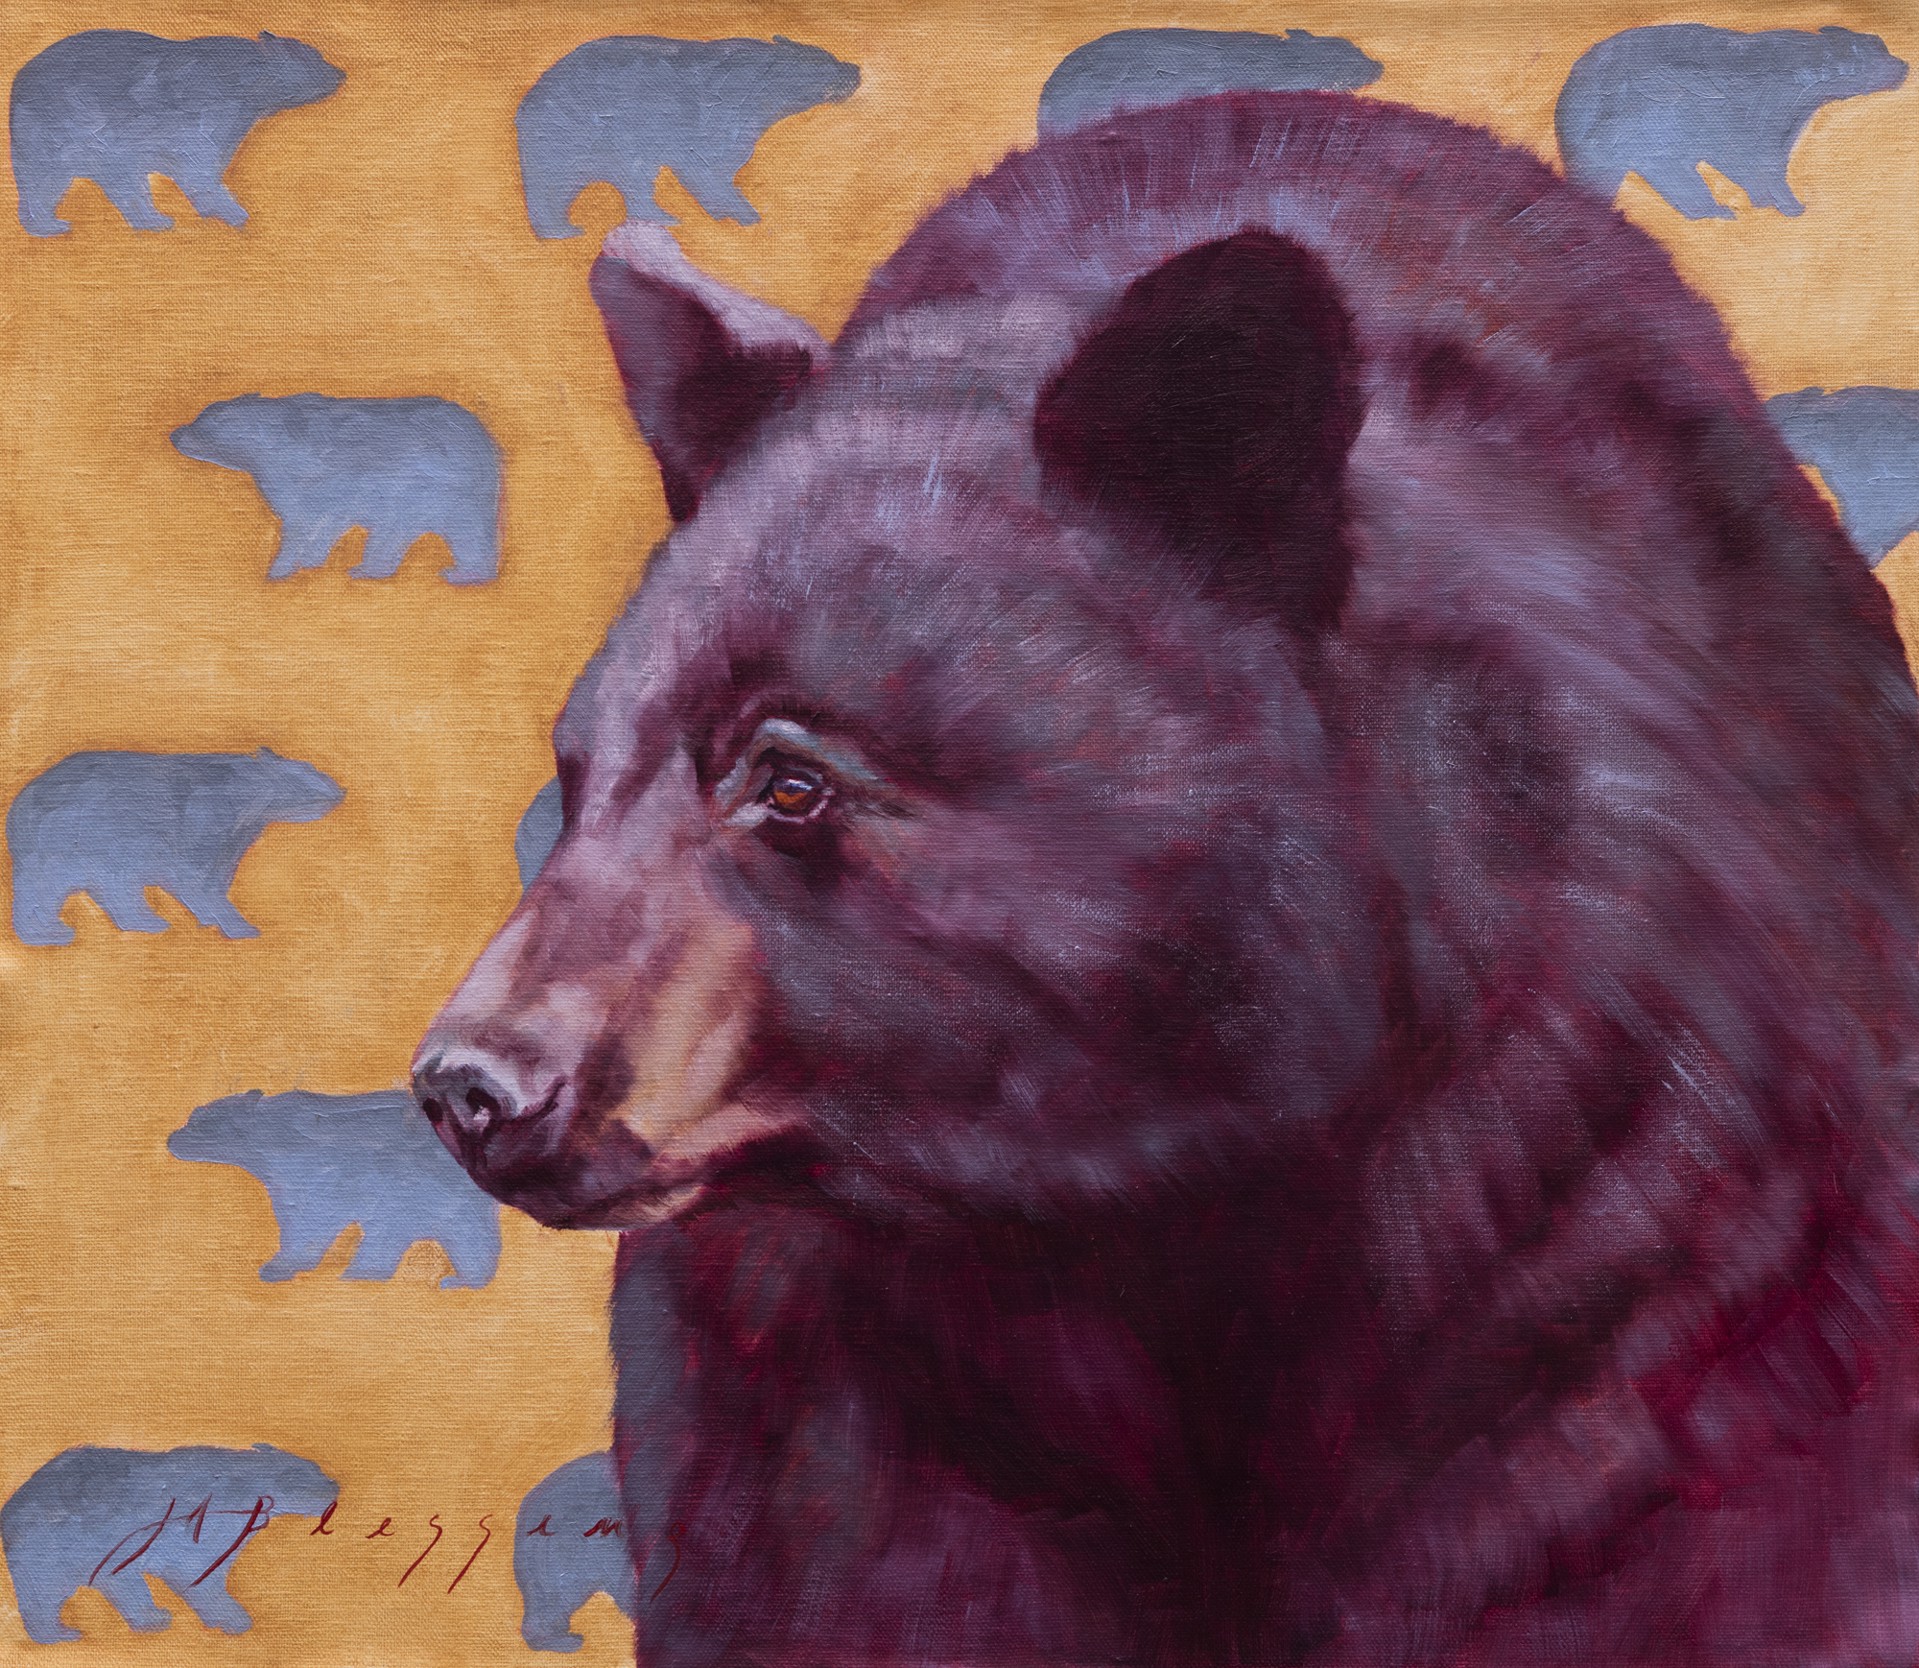 An Oil Painting Of A Black Bear Portrait With A Yellow Background With Patterned Rows Of Blue Bear Silhouettes, By Meagan Blessing, Available At Gallery Wild